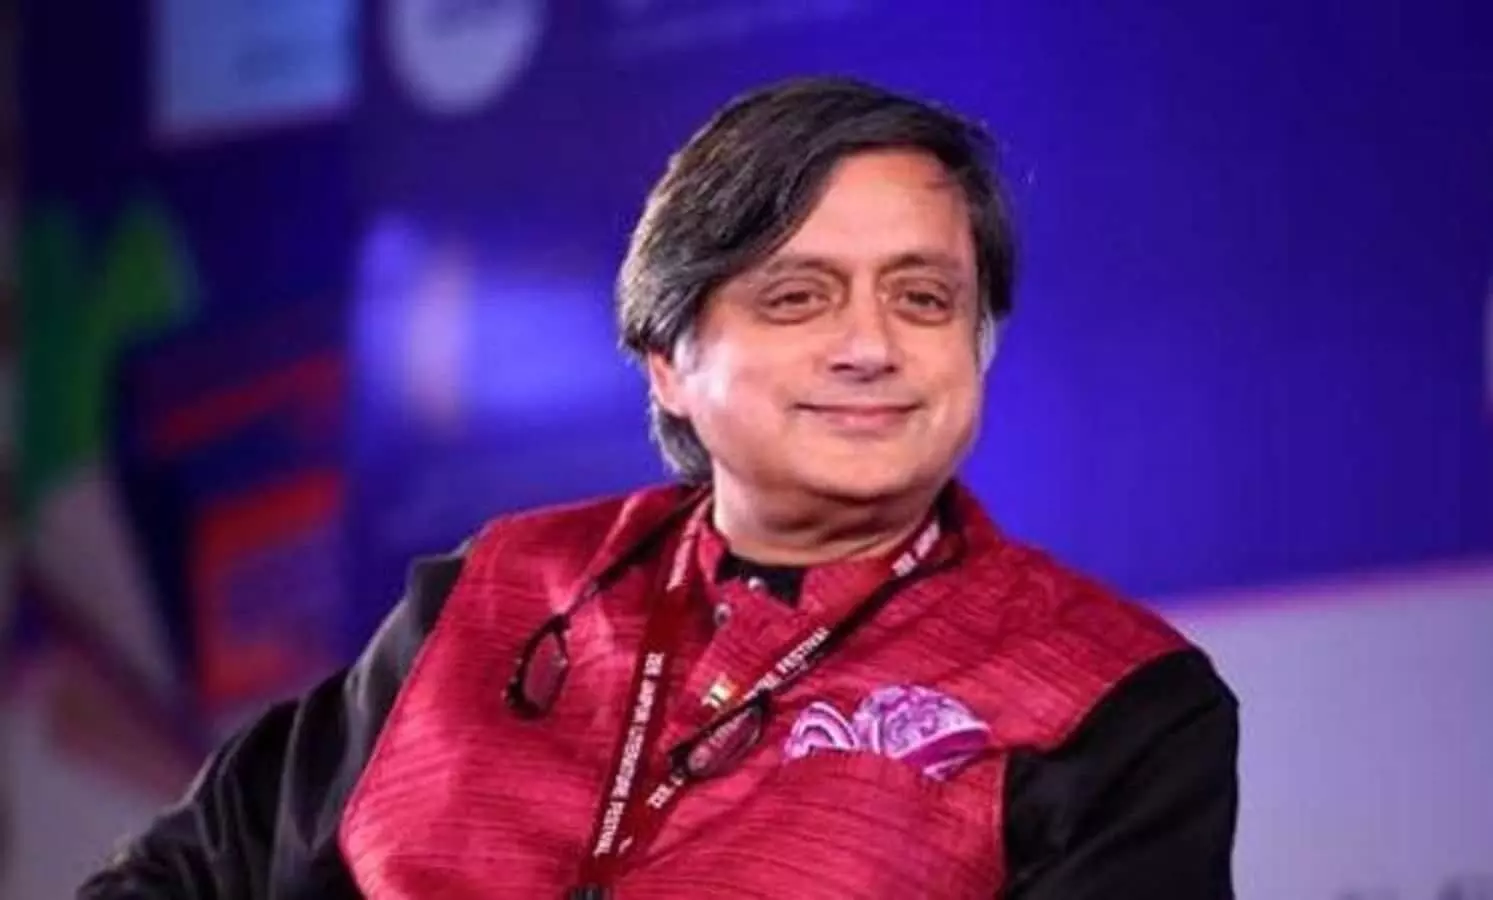 Congress is Worth Reforming And Reviving, says Shashi Tharoor